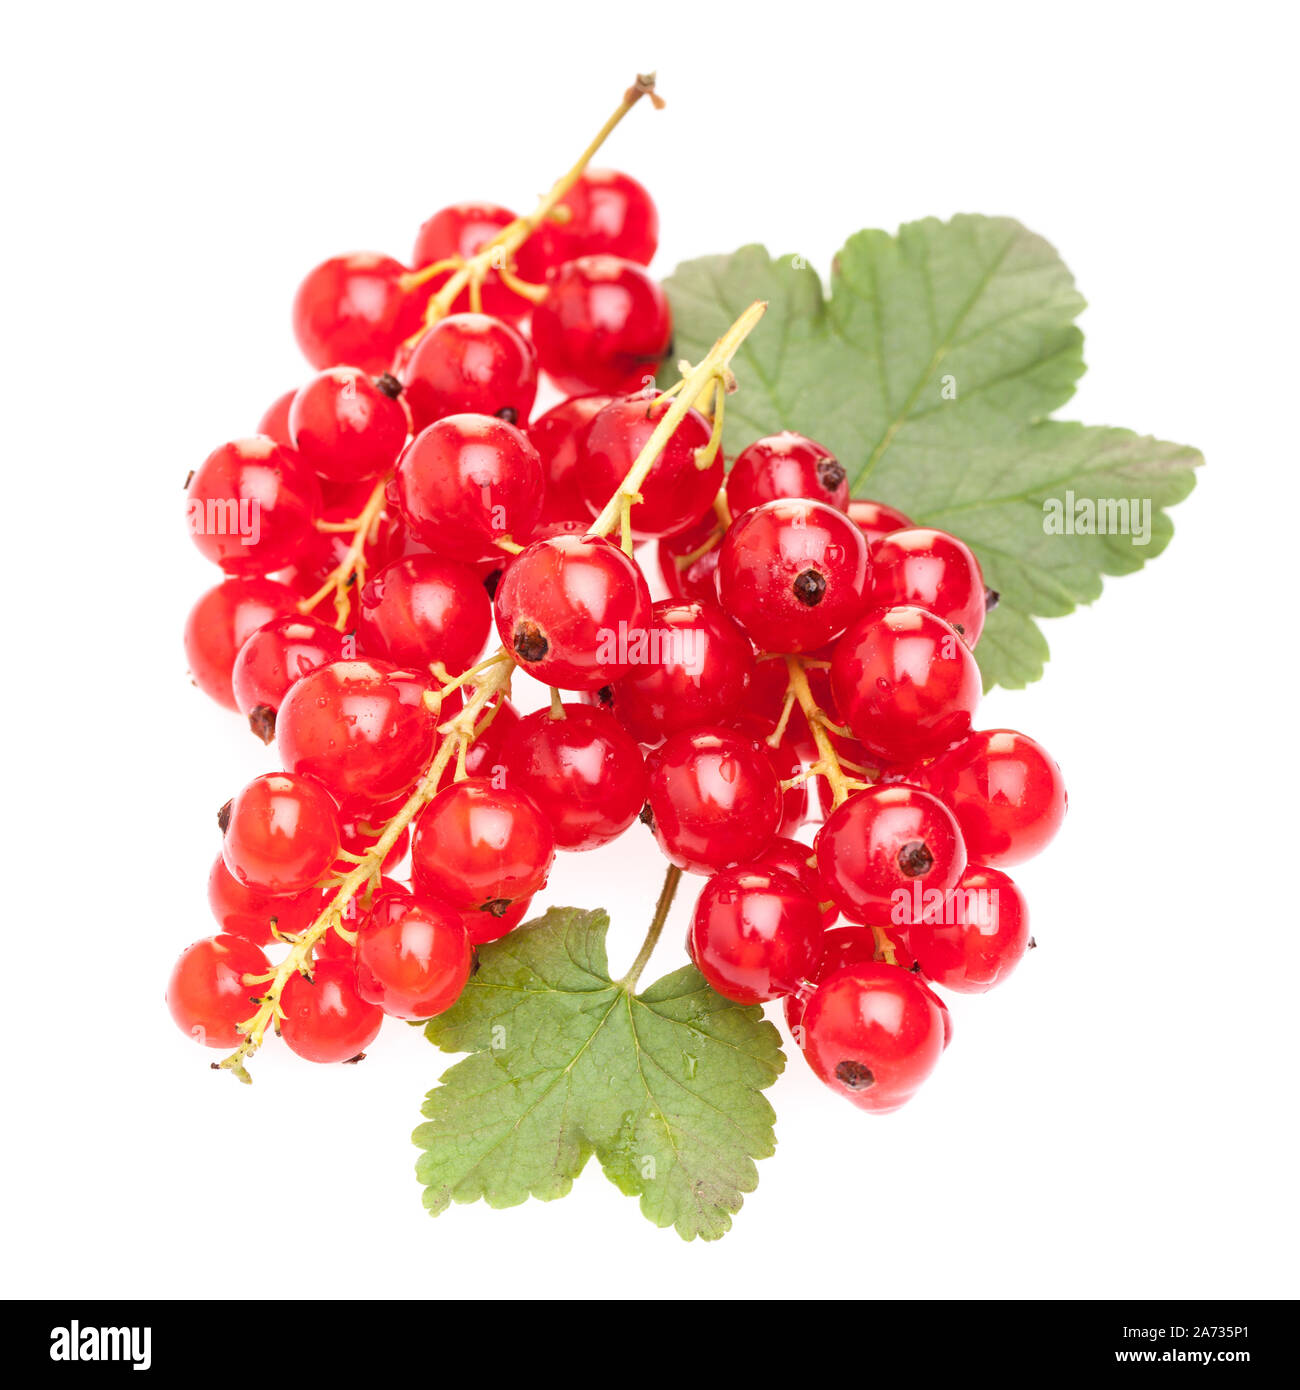 red currants (Ribisl) on a white background Stock Photo